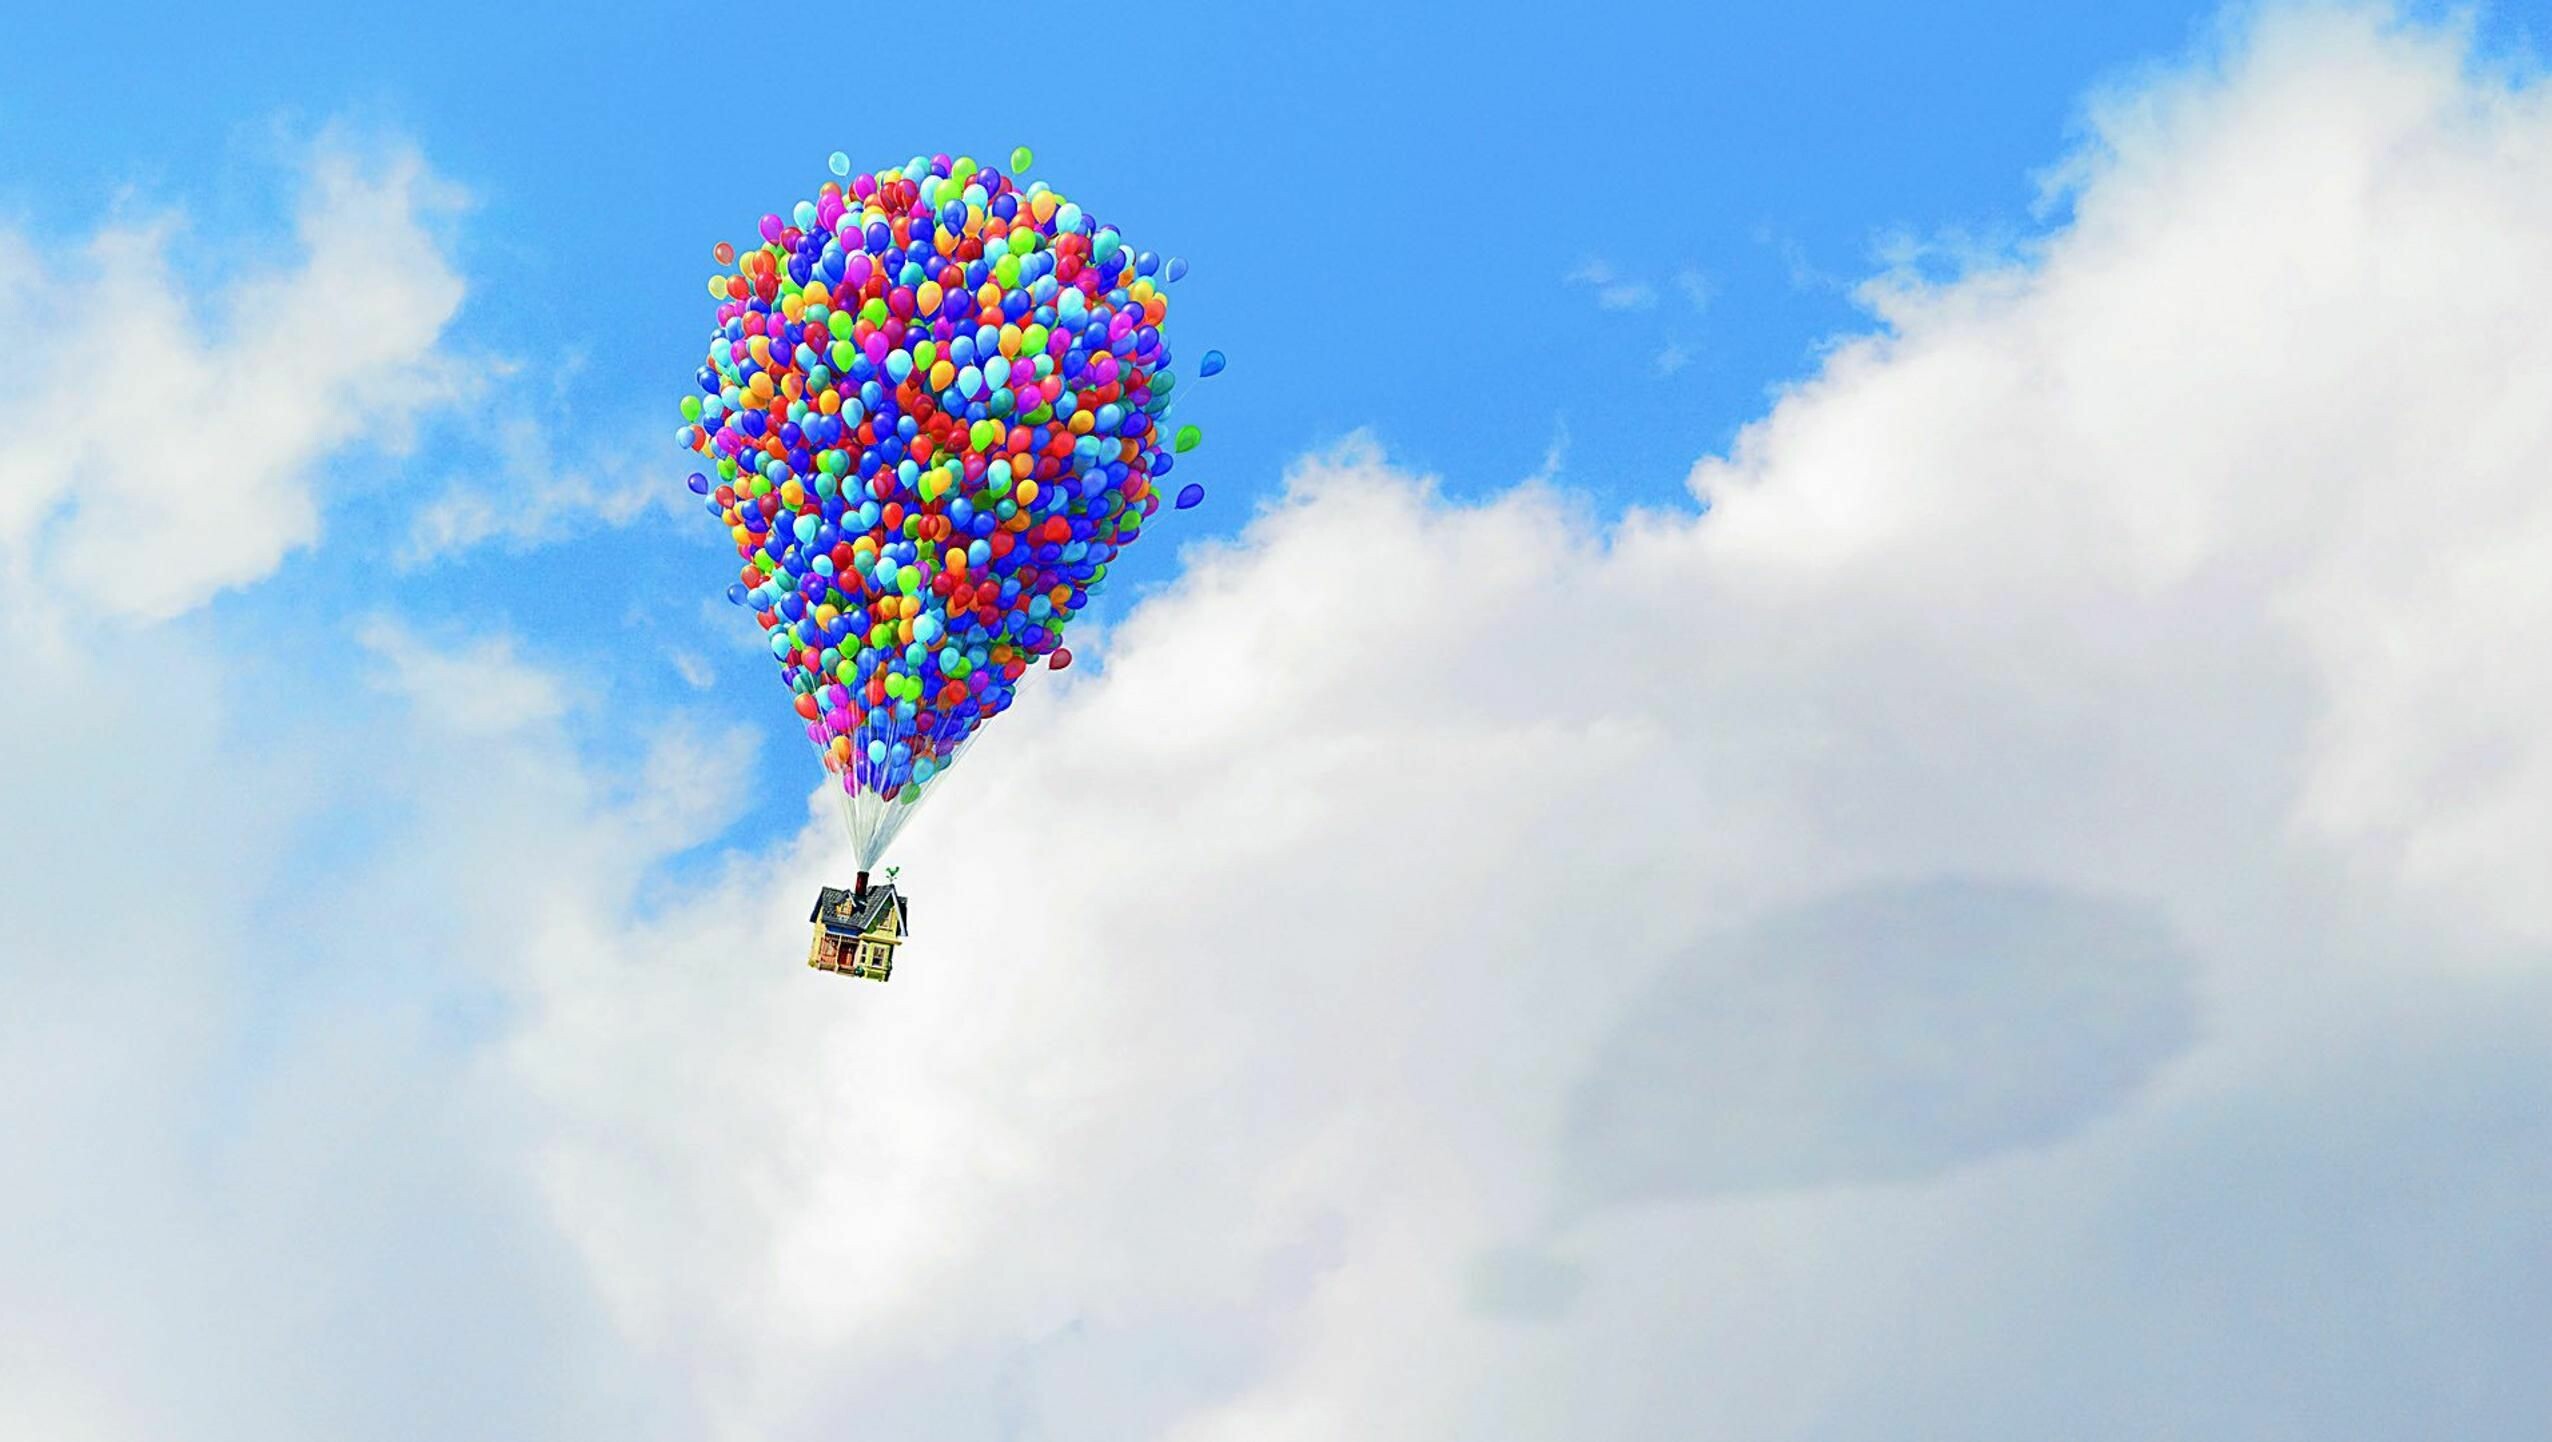 Up (Cartoon): 78-year-old Carl Fredricksen travels to Paradise Falls in his house equipped with balloons. 2560x1450 HD Wallpaper.